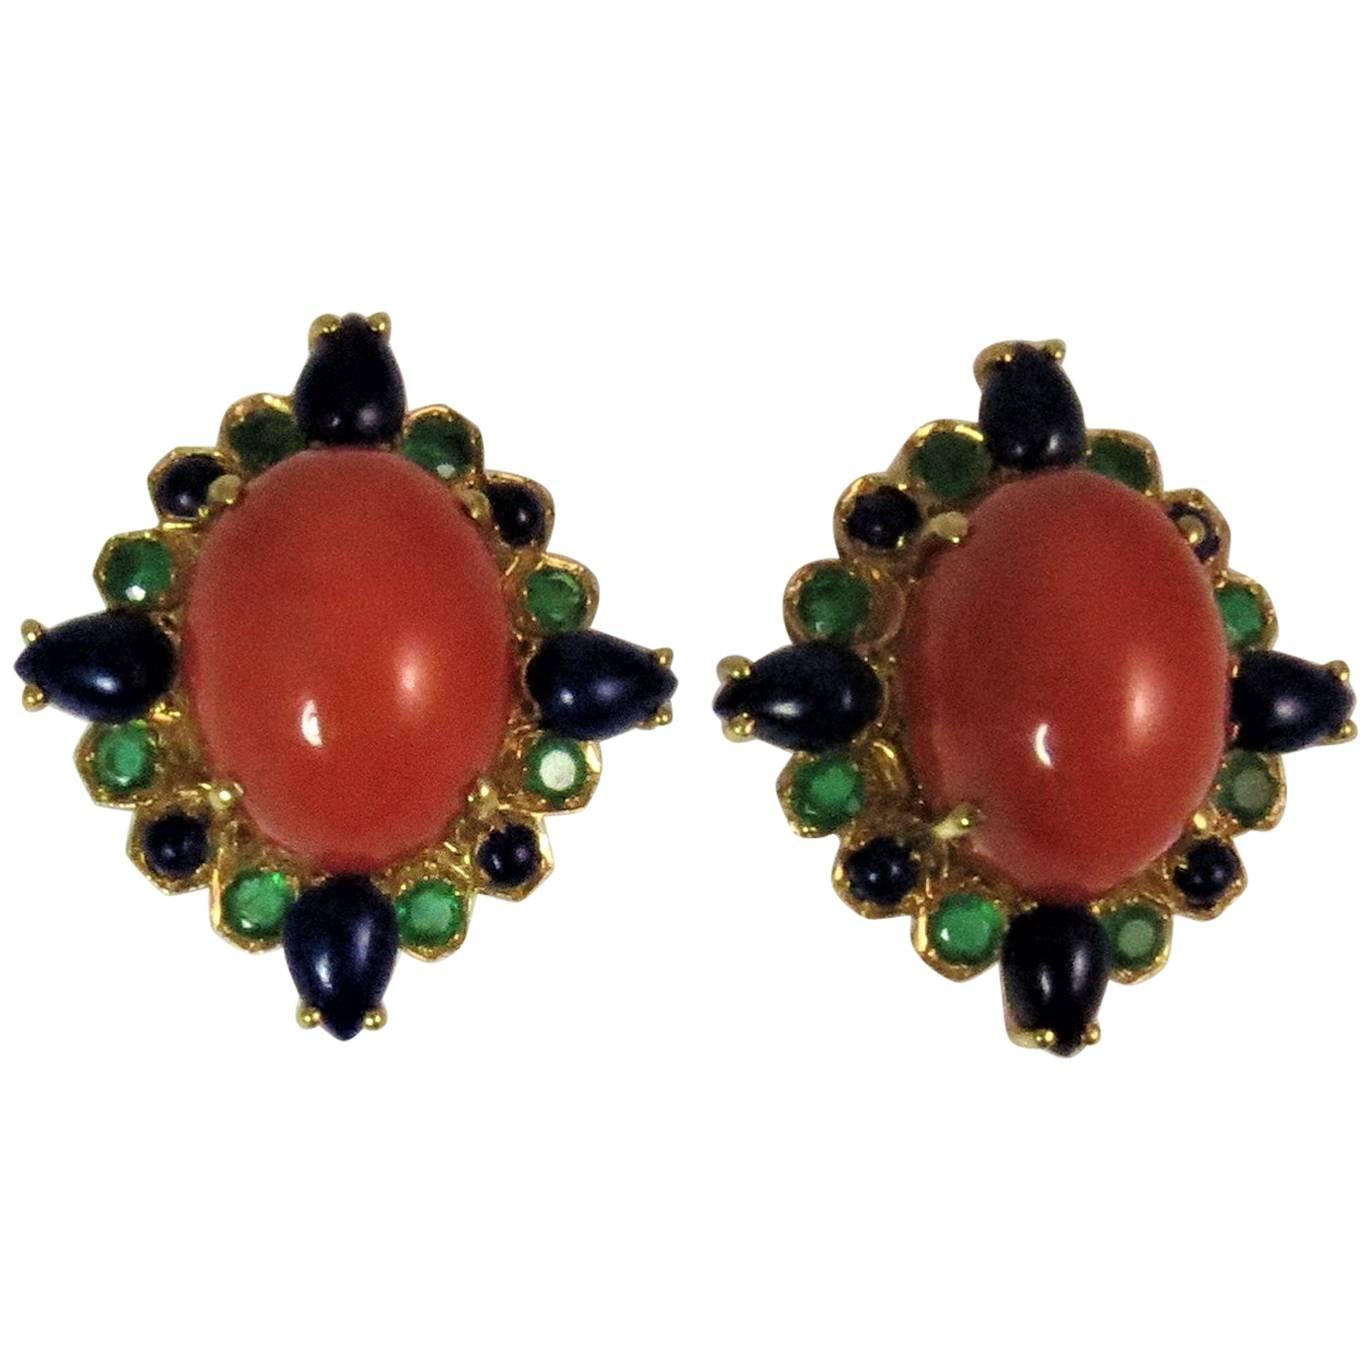  Salmon Colored Cabochon Coral Lapis  Emerald 18 Karat Yellow Gold Earrings